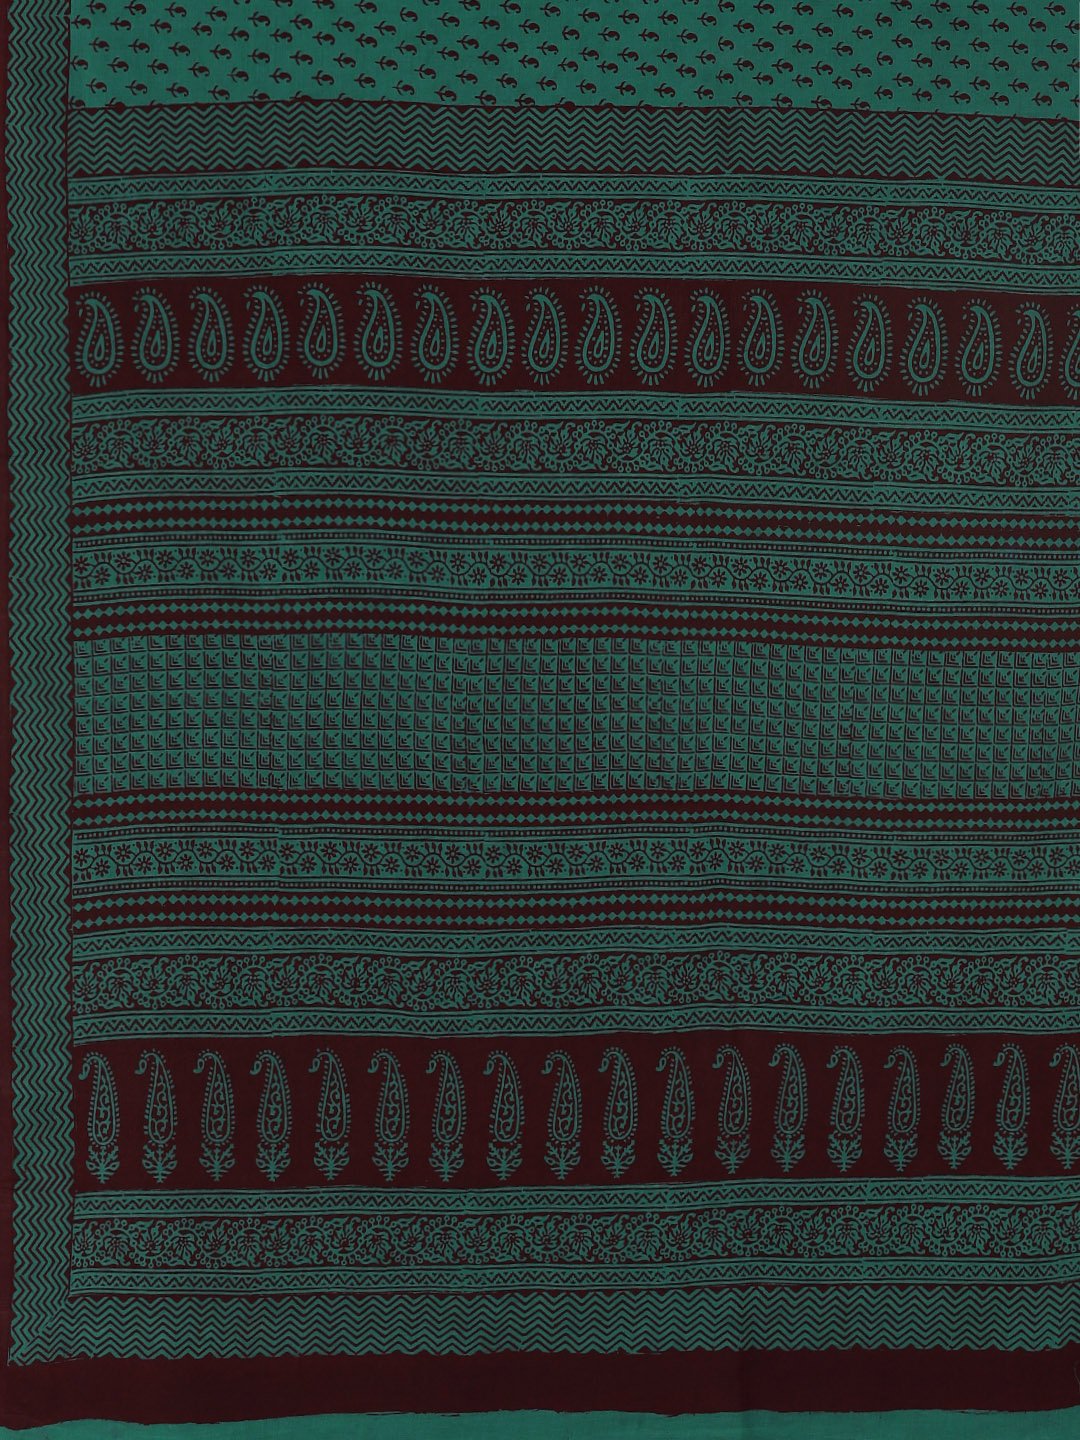 Green Coffee Brown Handblock Print Bagh Saree-Saree-Kalakari India-MRBASA0018-Bagh, Cotton, Geographical Indication, Hand Blocks, Hand Crafted, Heritage Prints, Natural Dyes, Sarees, Sustainable Fabrics-[Linen,Ethnic,wear,Fashionista,Handloom,Handicraft,Indigo,blockprint,block,print,Cotton,Chanderi,Blue, latest,classy,party,bollywood,trendy,summer,style,traditional,formal,elegant,unique,style,hand,block,print, dabu,booti,gift,present,glamorous,affordable,collectible,Sari,Saree,printed, holi, Diw